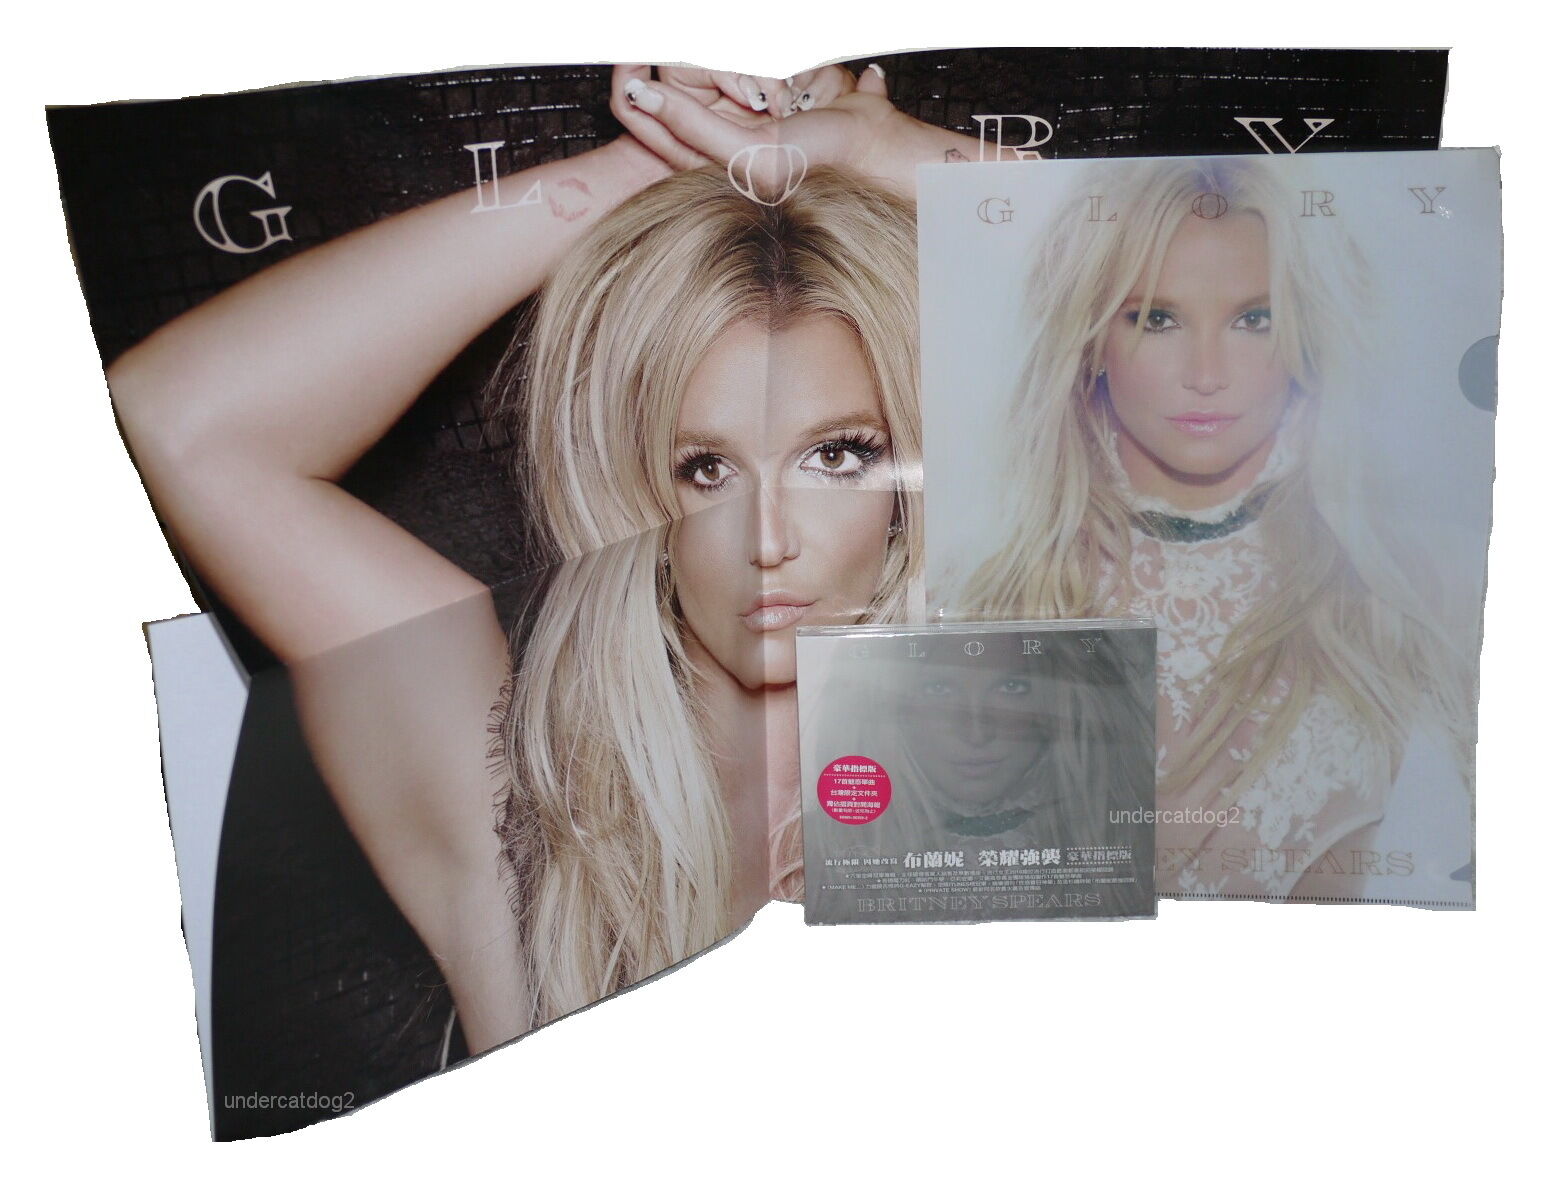 Britney Spears Glory (Deluxe Explicit) Taiwan Ltd CD+Clear File+poster (17-trks)